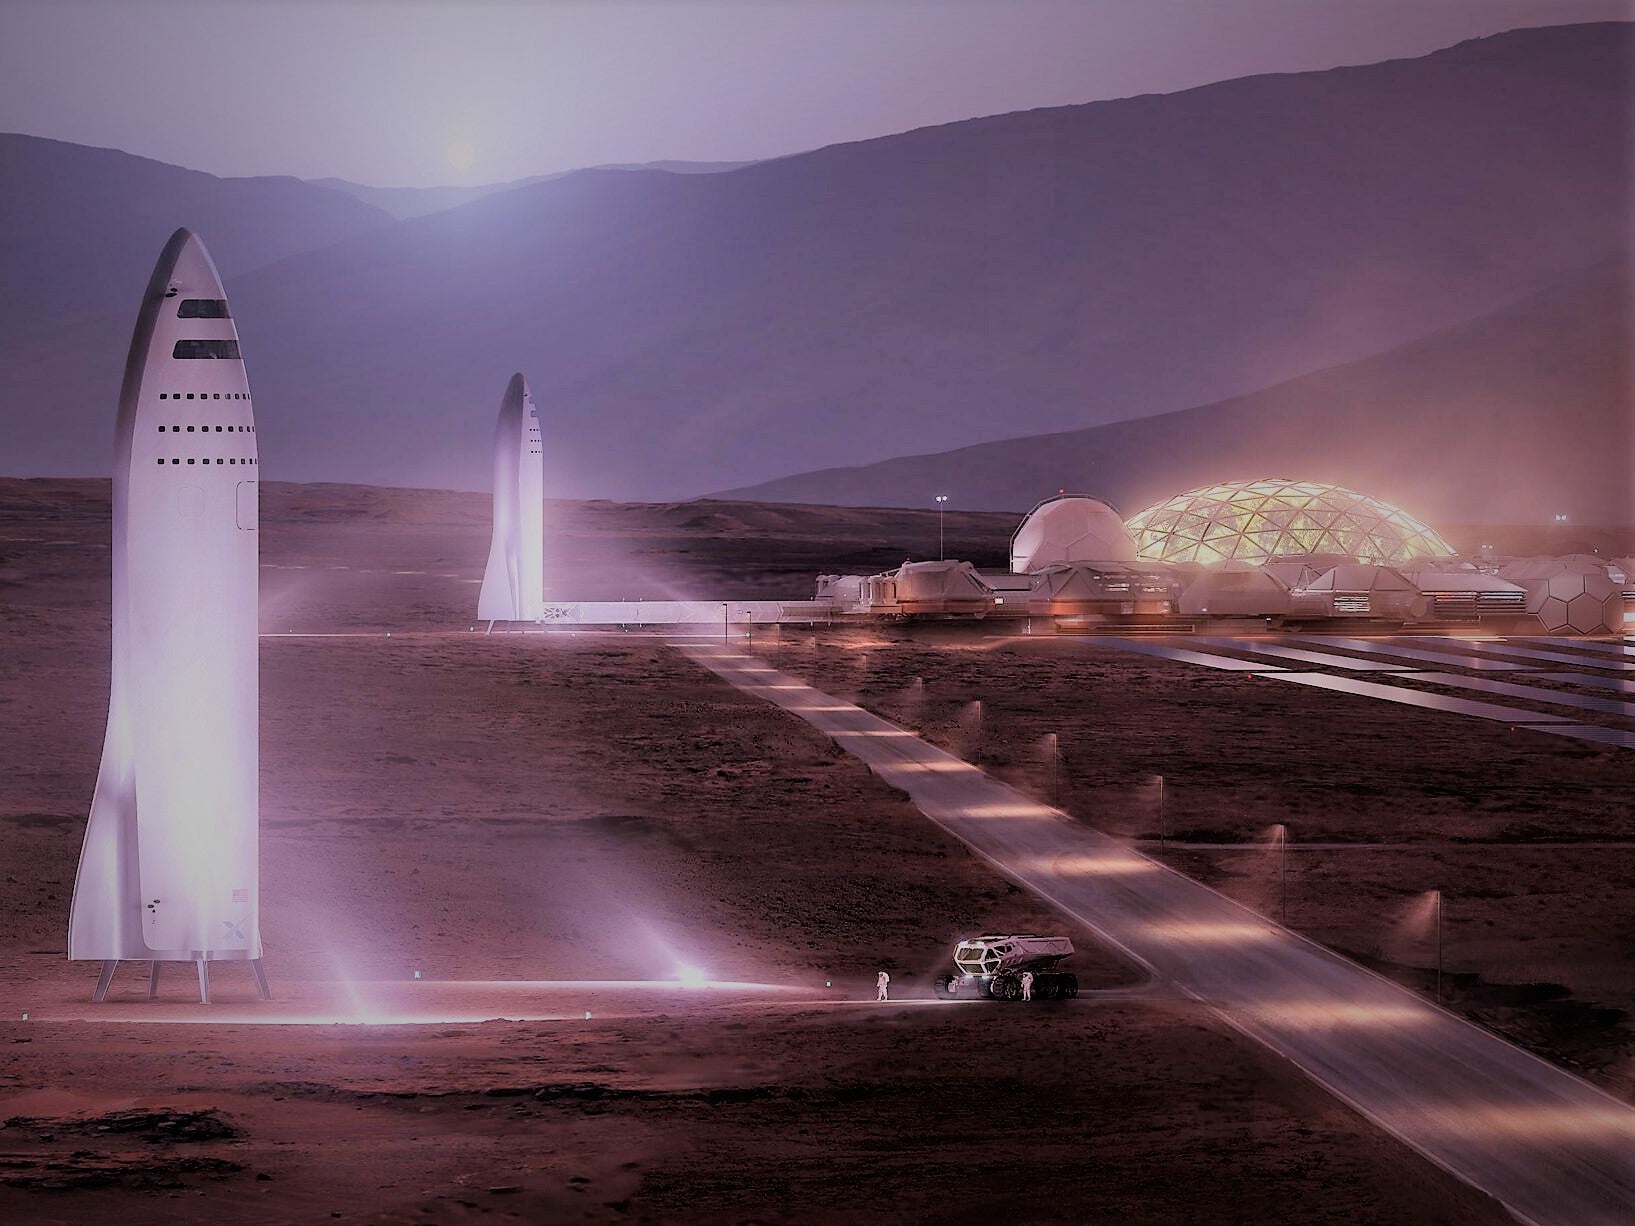 Elon Musk’s SpaceX plans to build a fleet of 1,000 Mars-bound Starship rockets, each capable of carrying 100 people